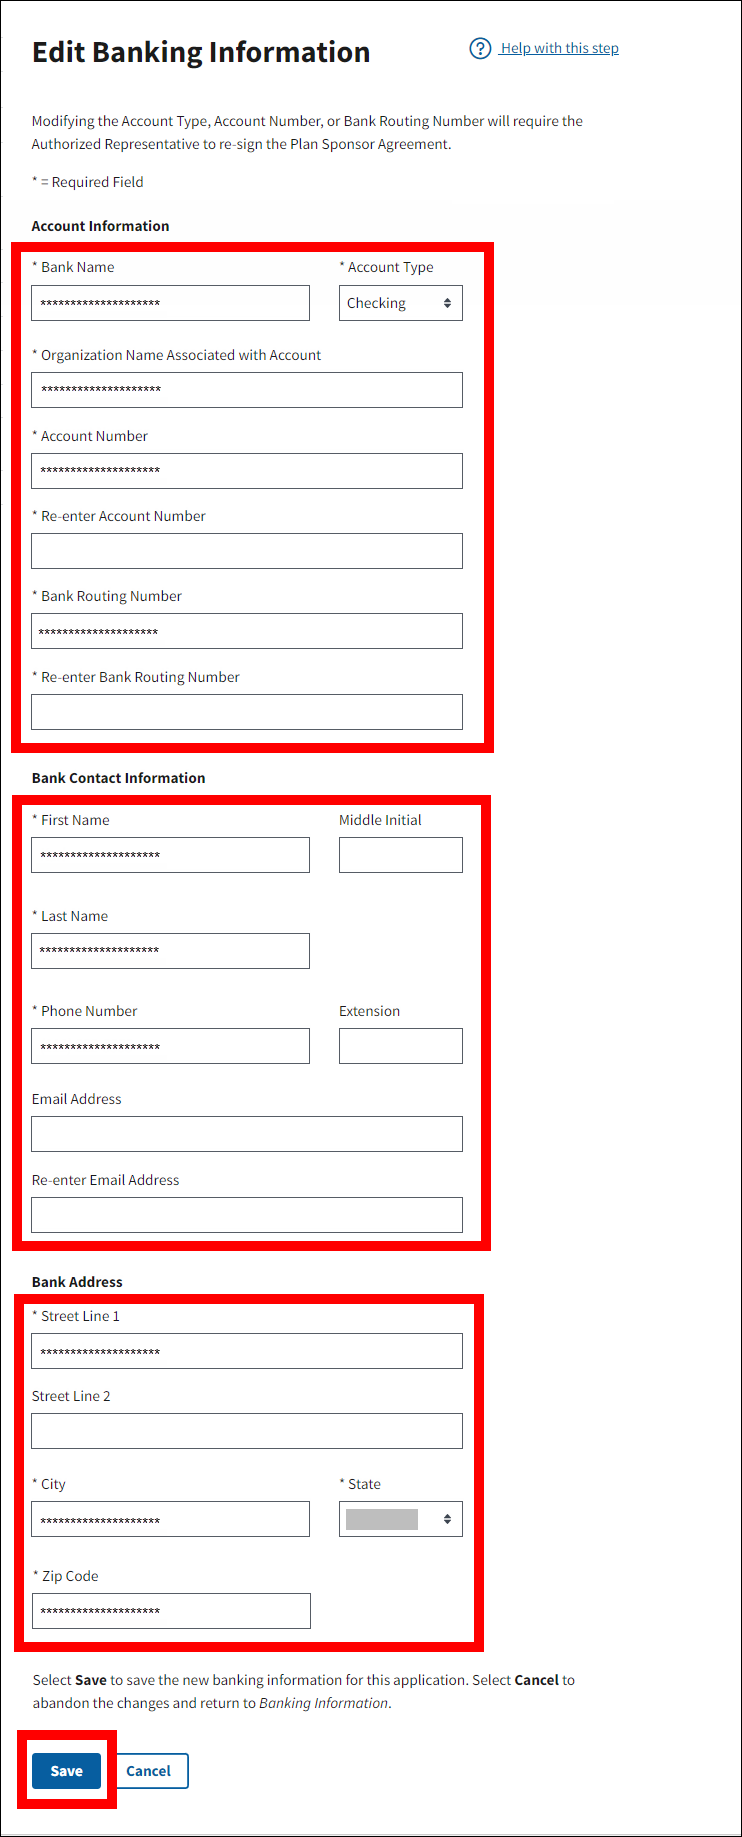 Edit Banking Information page with sample data. Form fields and Save button are highlighted.